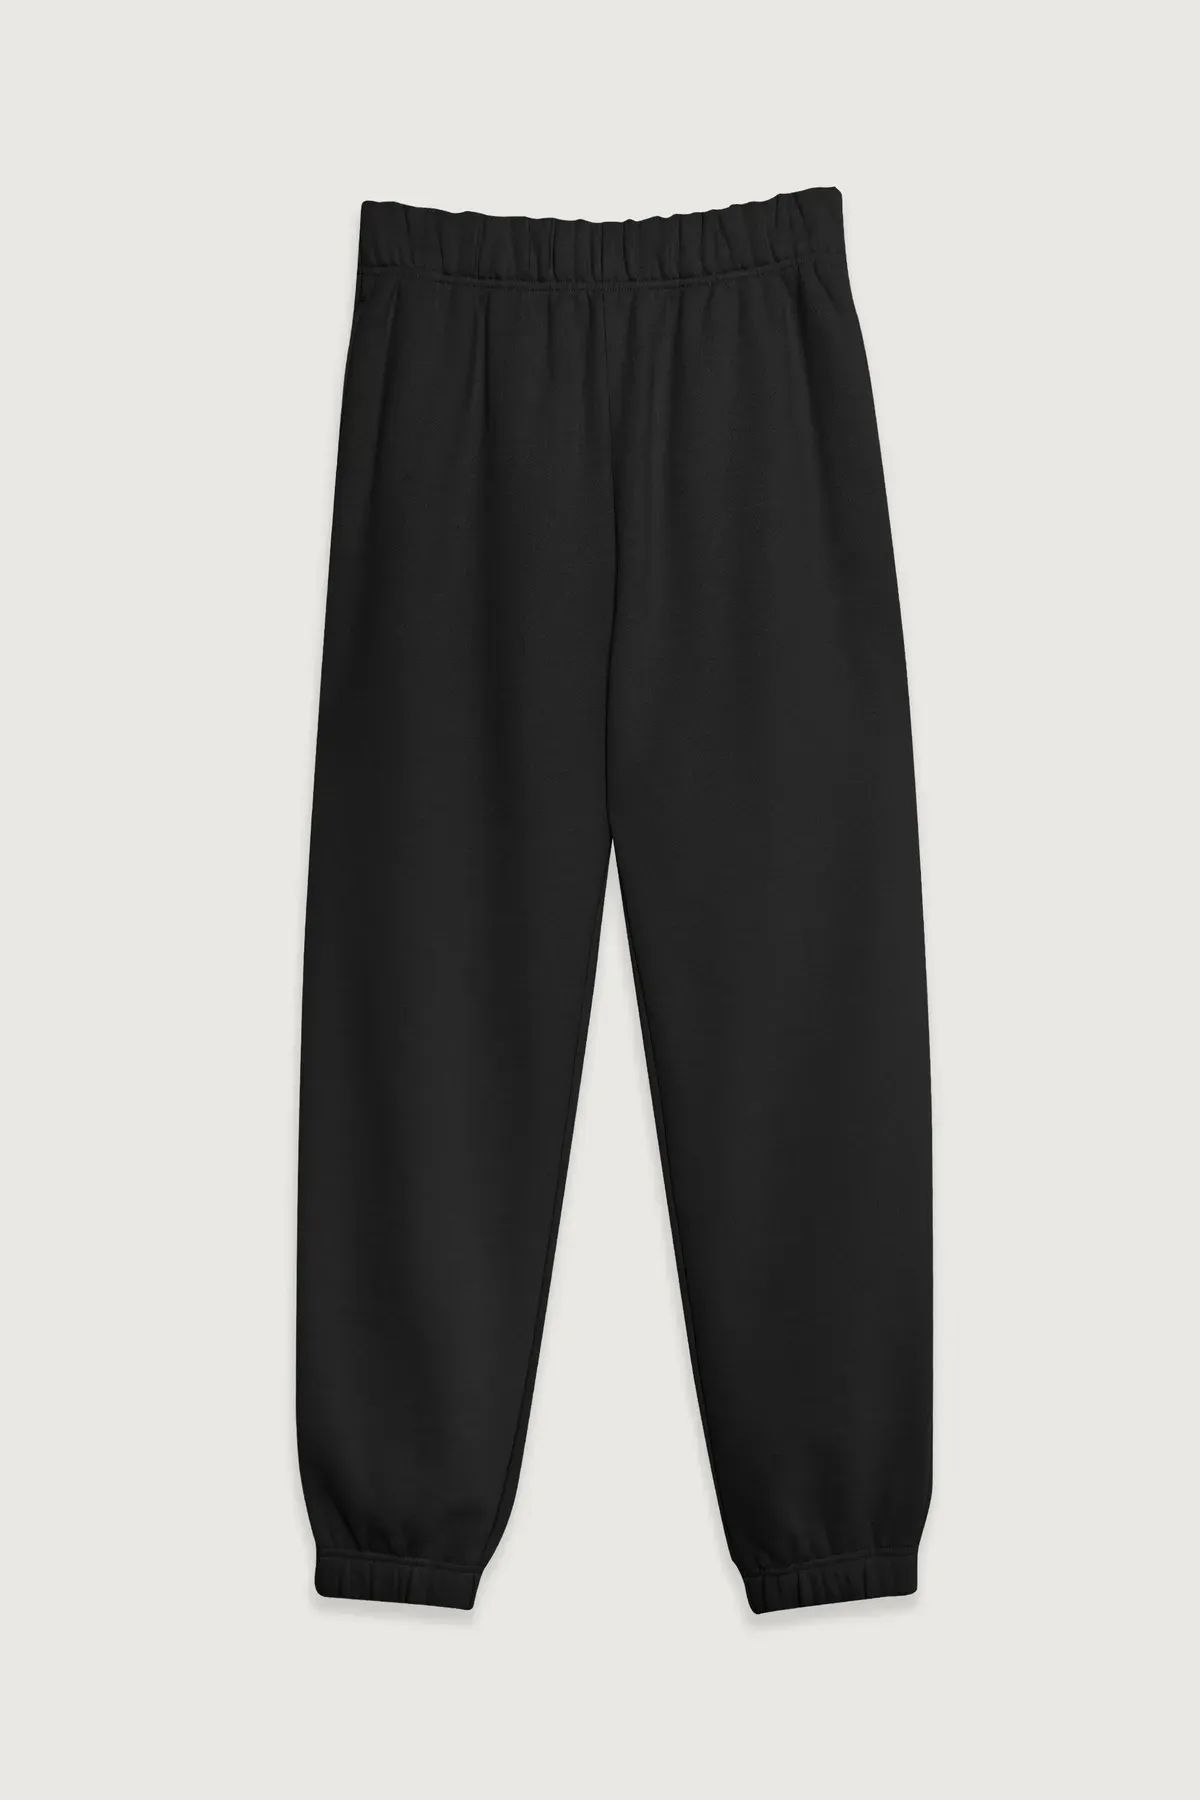 RELAXED FIT JOGGER | OAK + FORT